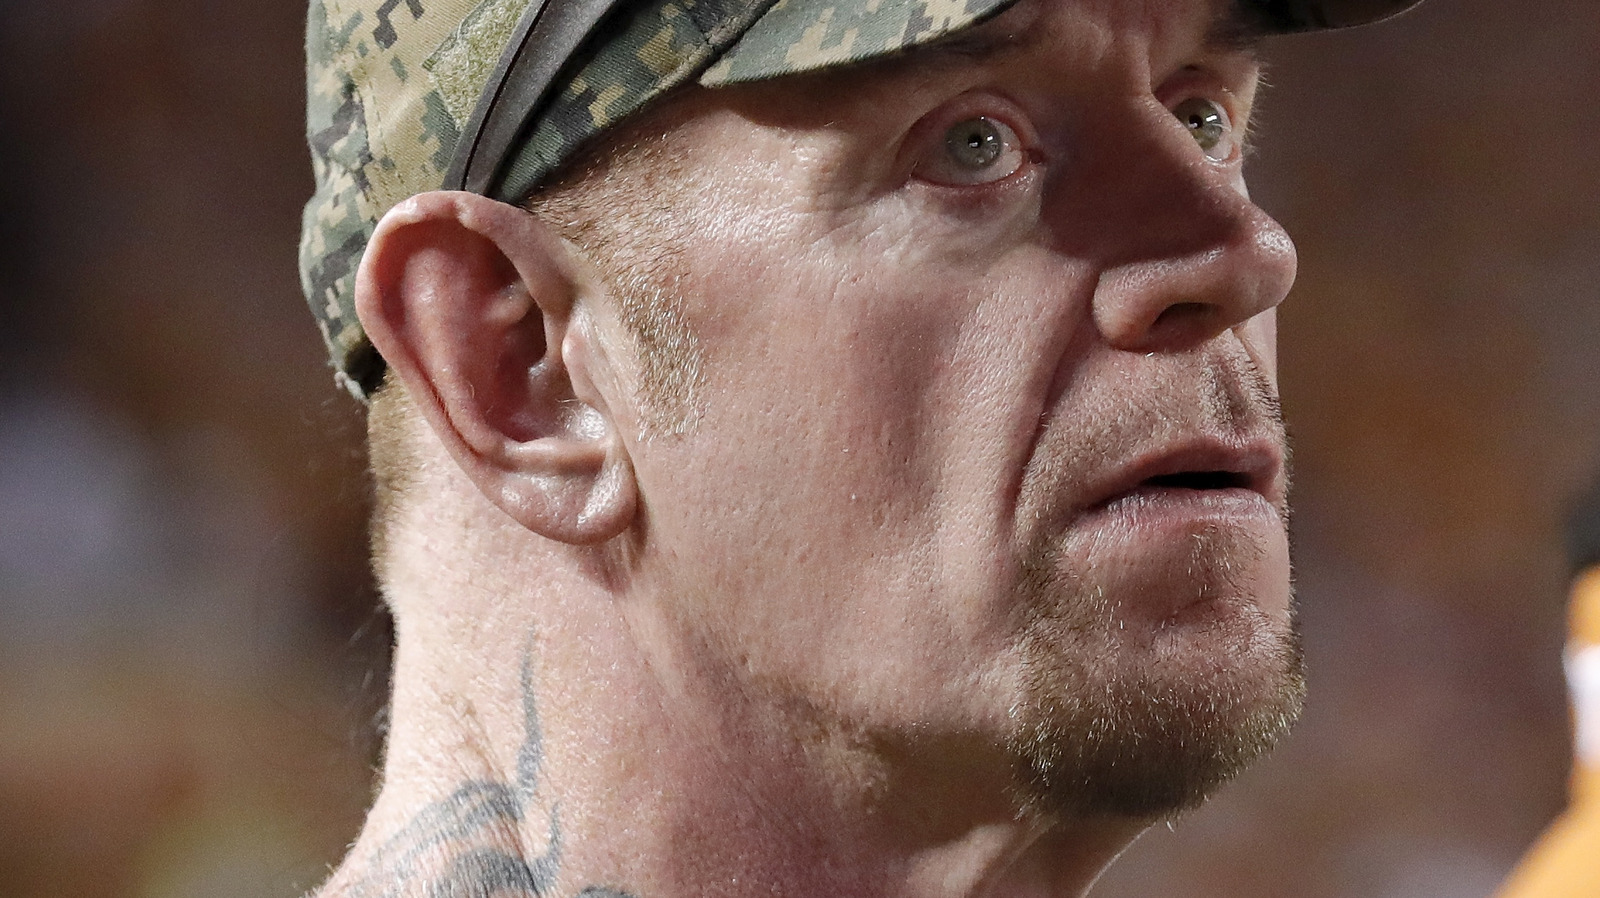 undertaker without makeup